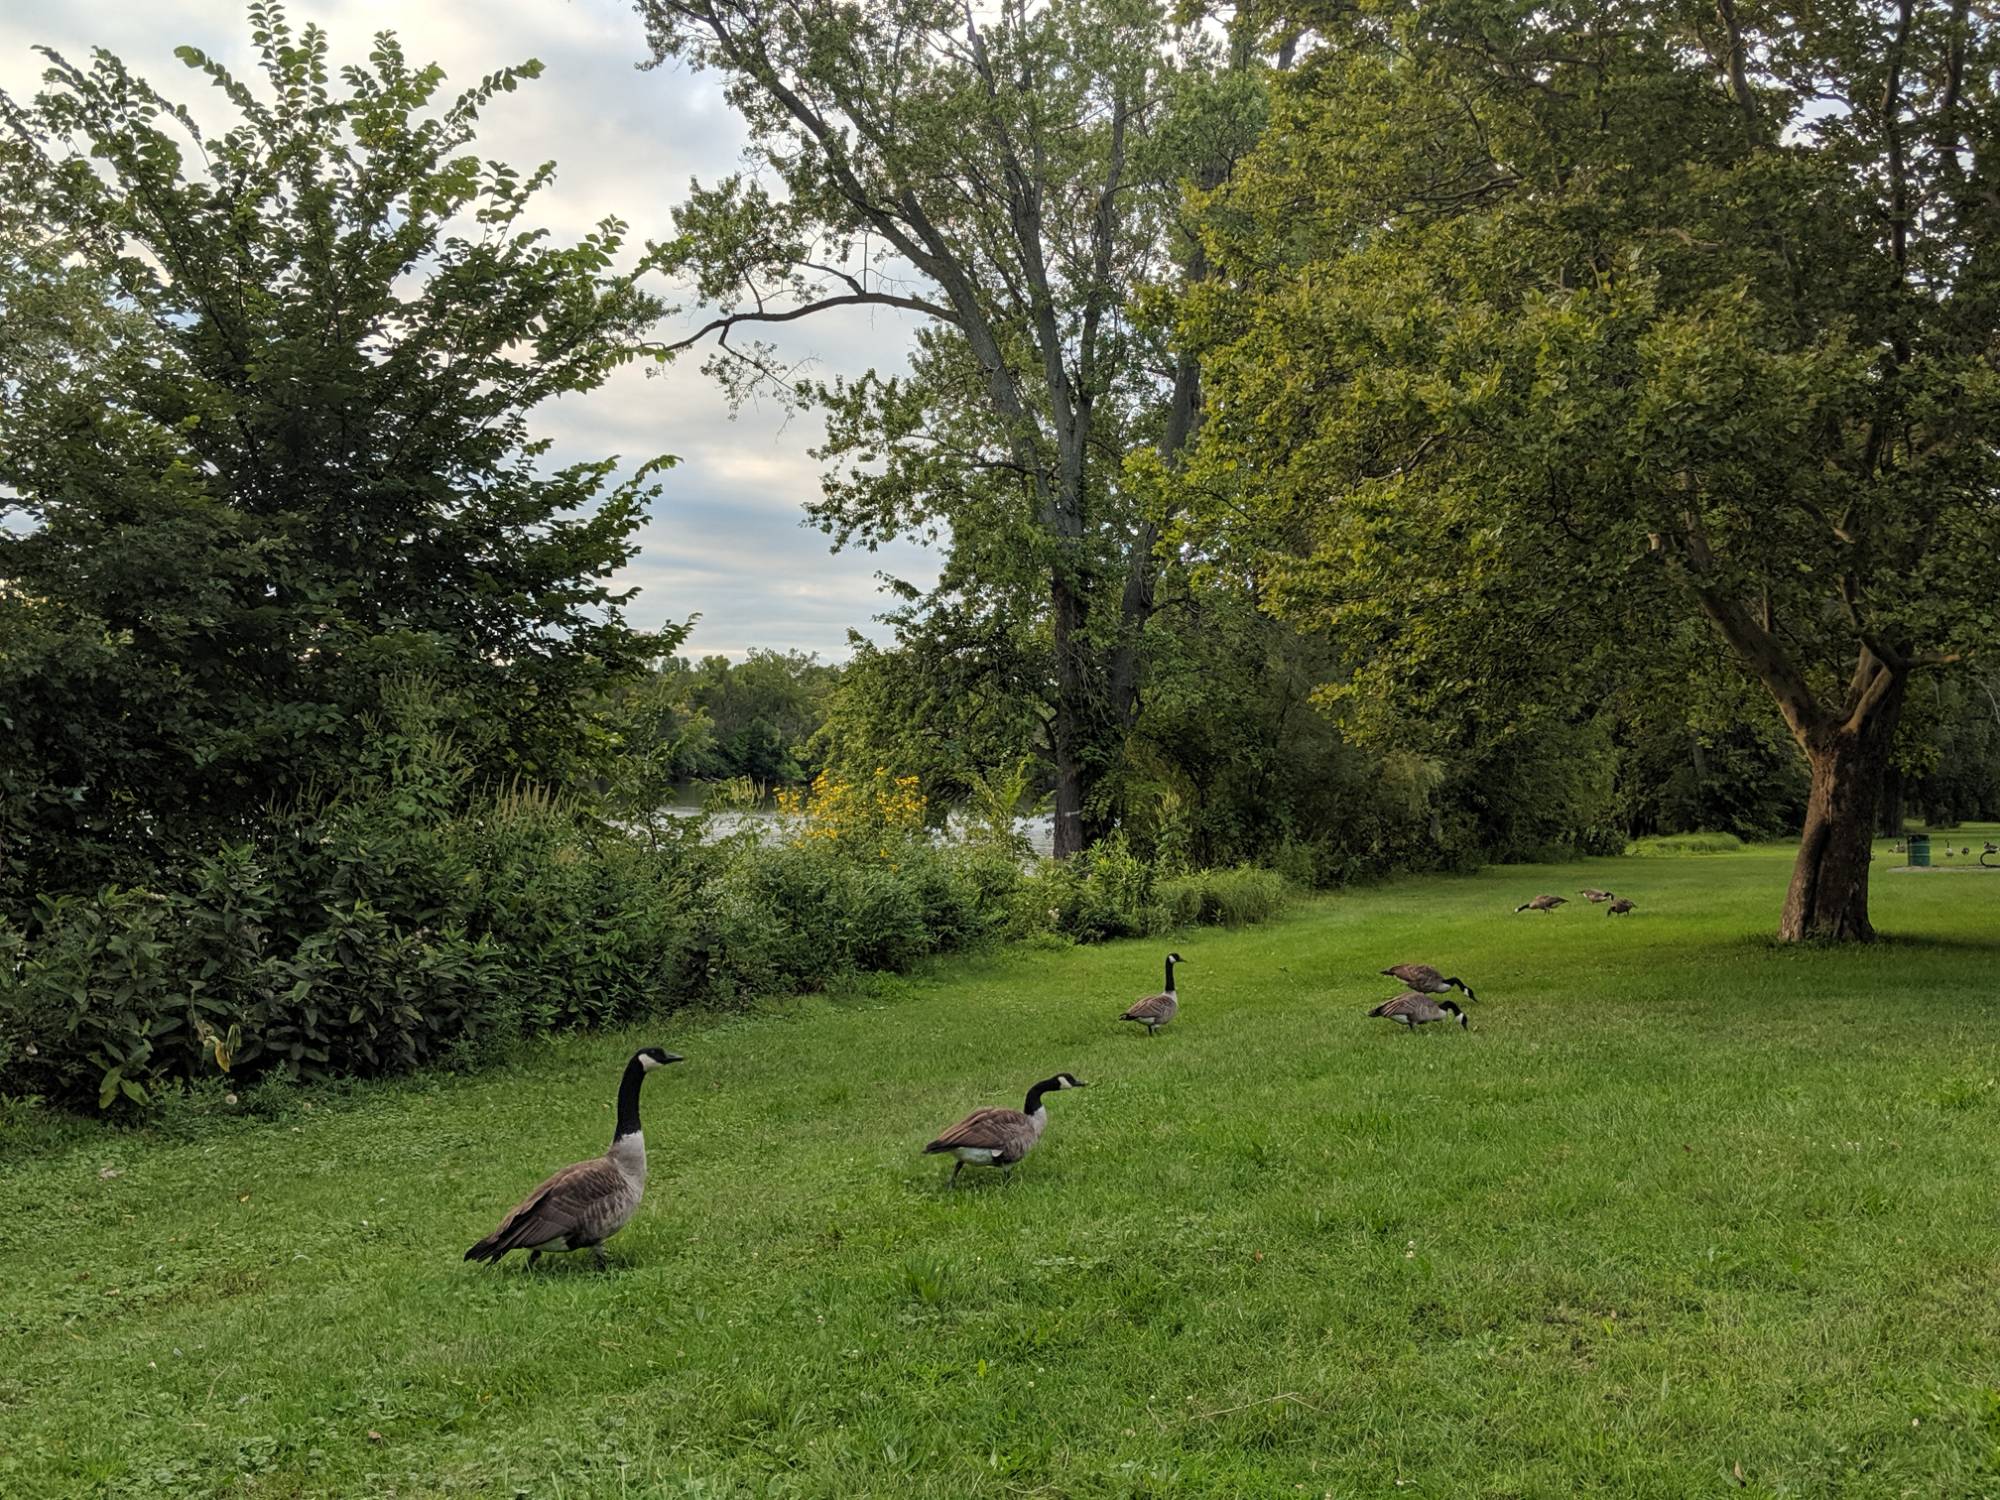 Canada geese in a park